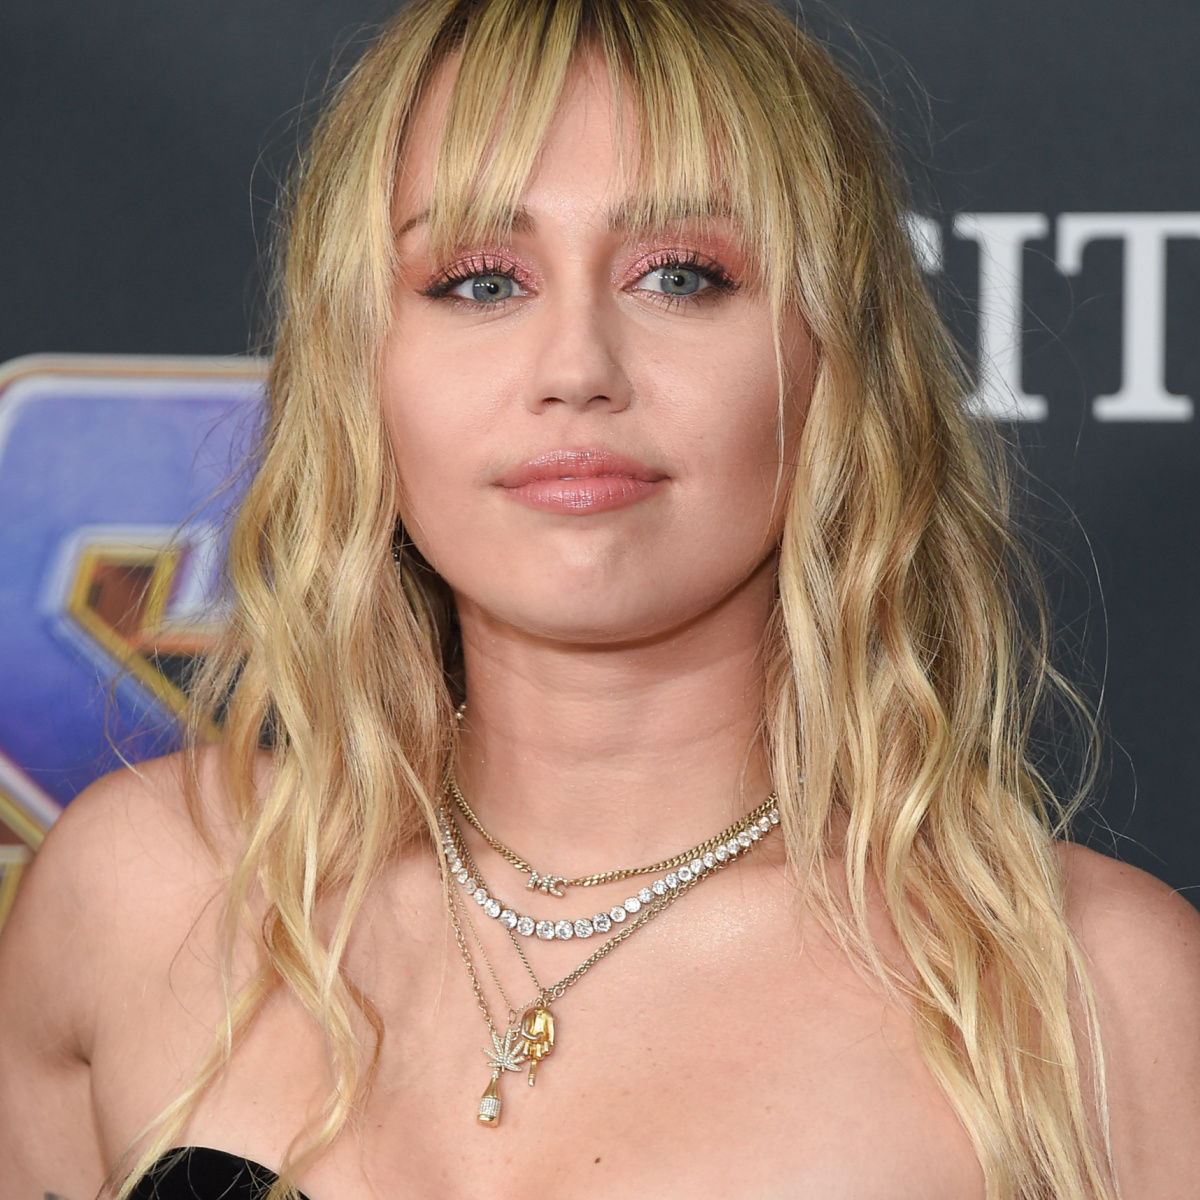 Watch: Celebrity Miley Cyrus sizzles on June British Vogue cover, web fans and celebrity friend’s comment